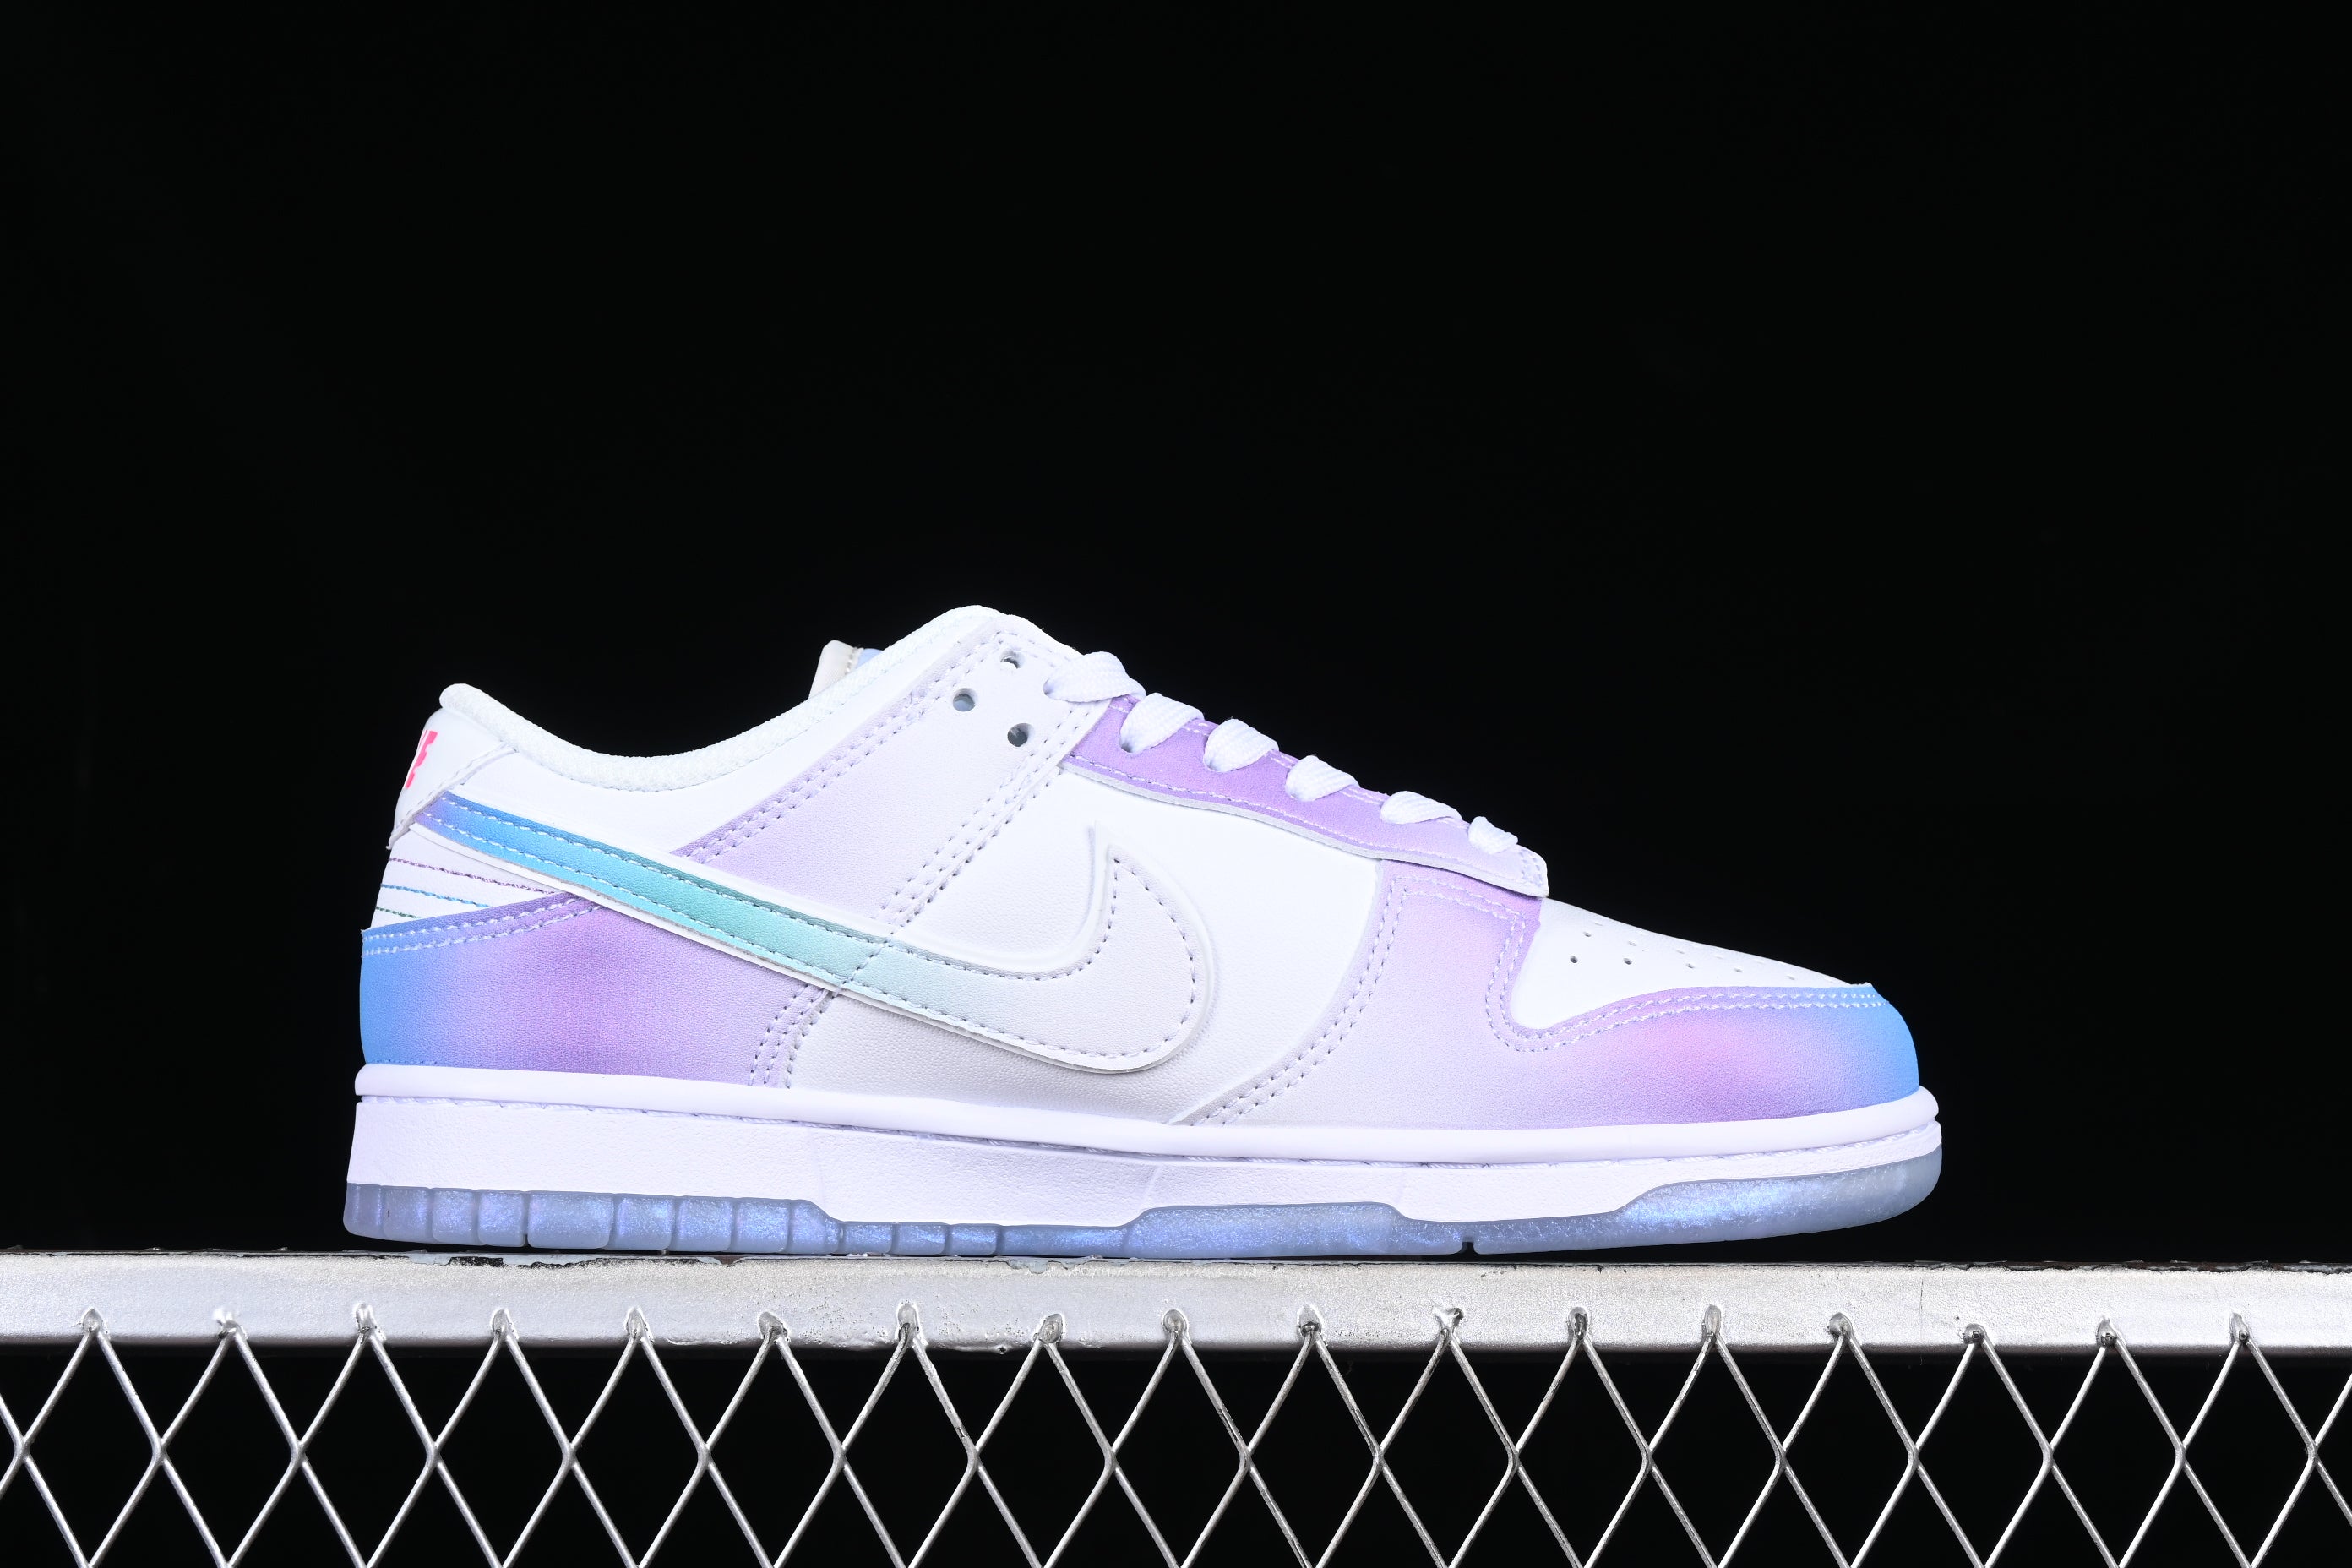 Dunk Low "Violet and Hyper Pink"